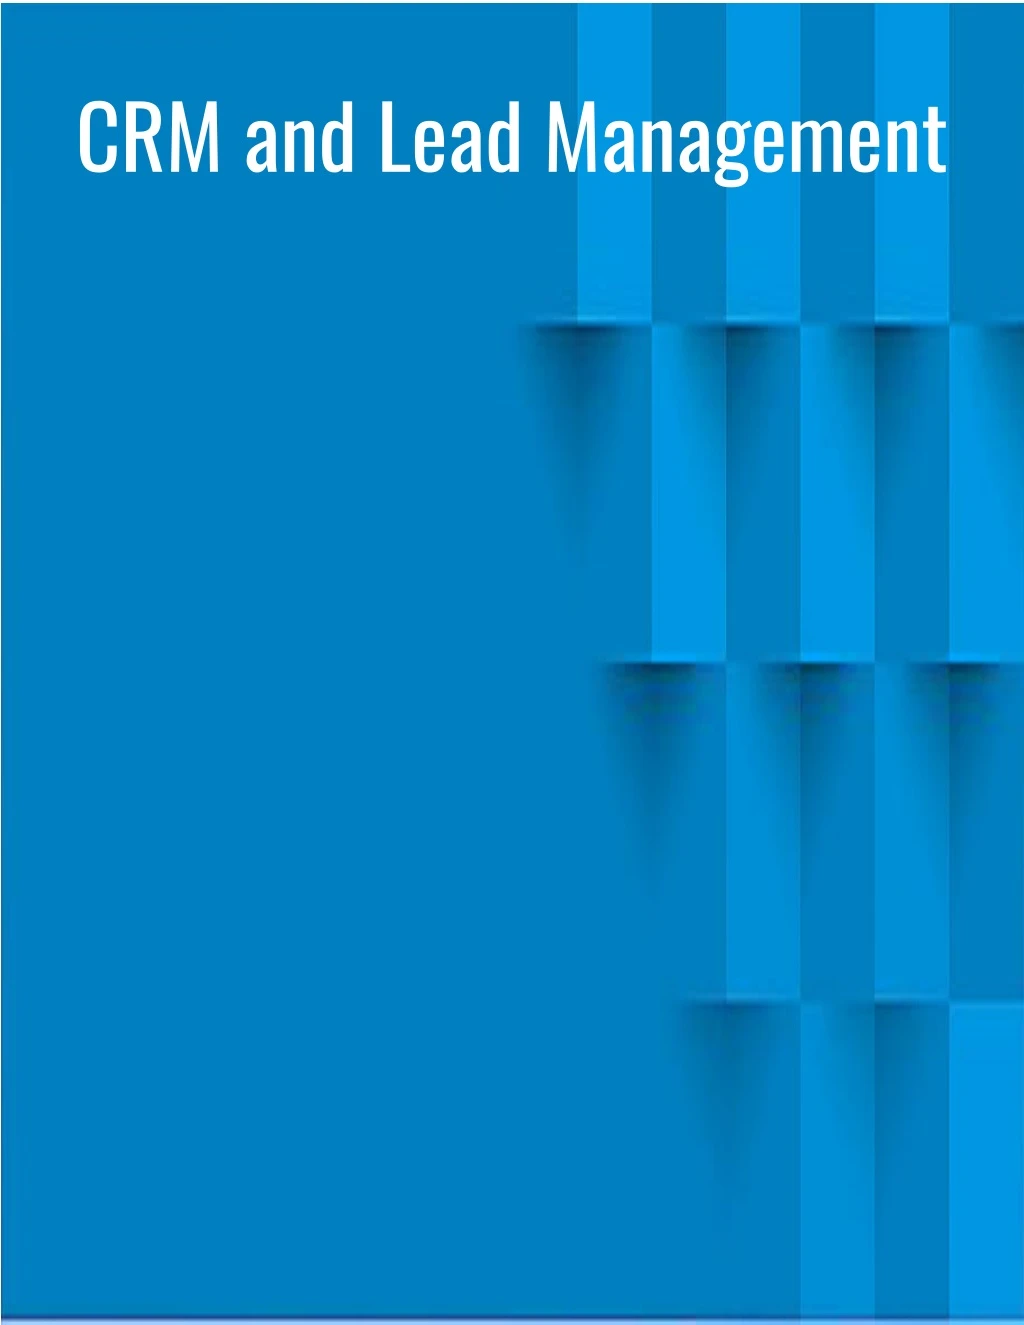 crm and lead management